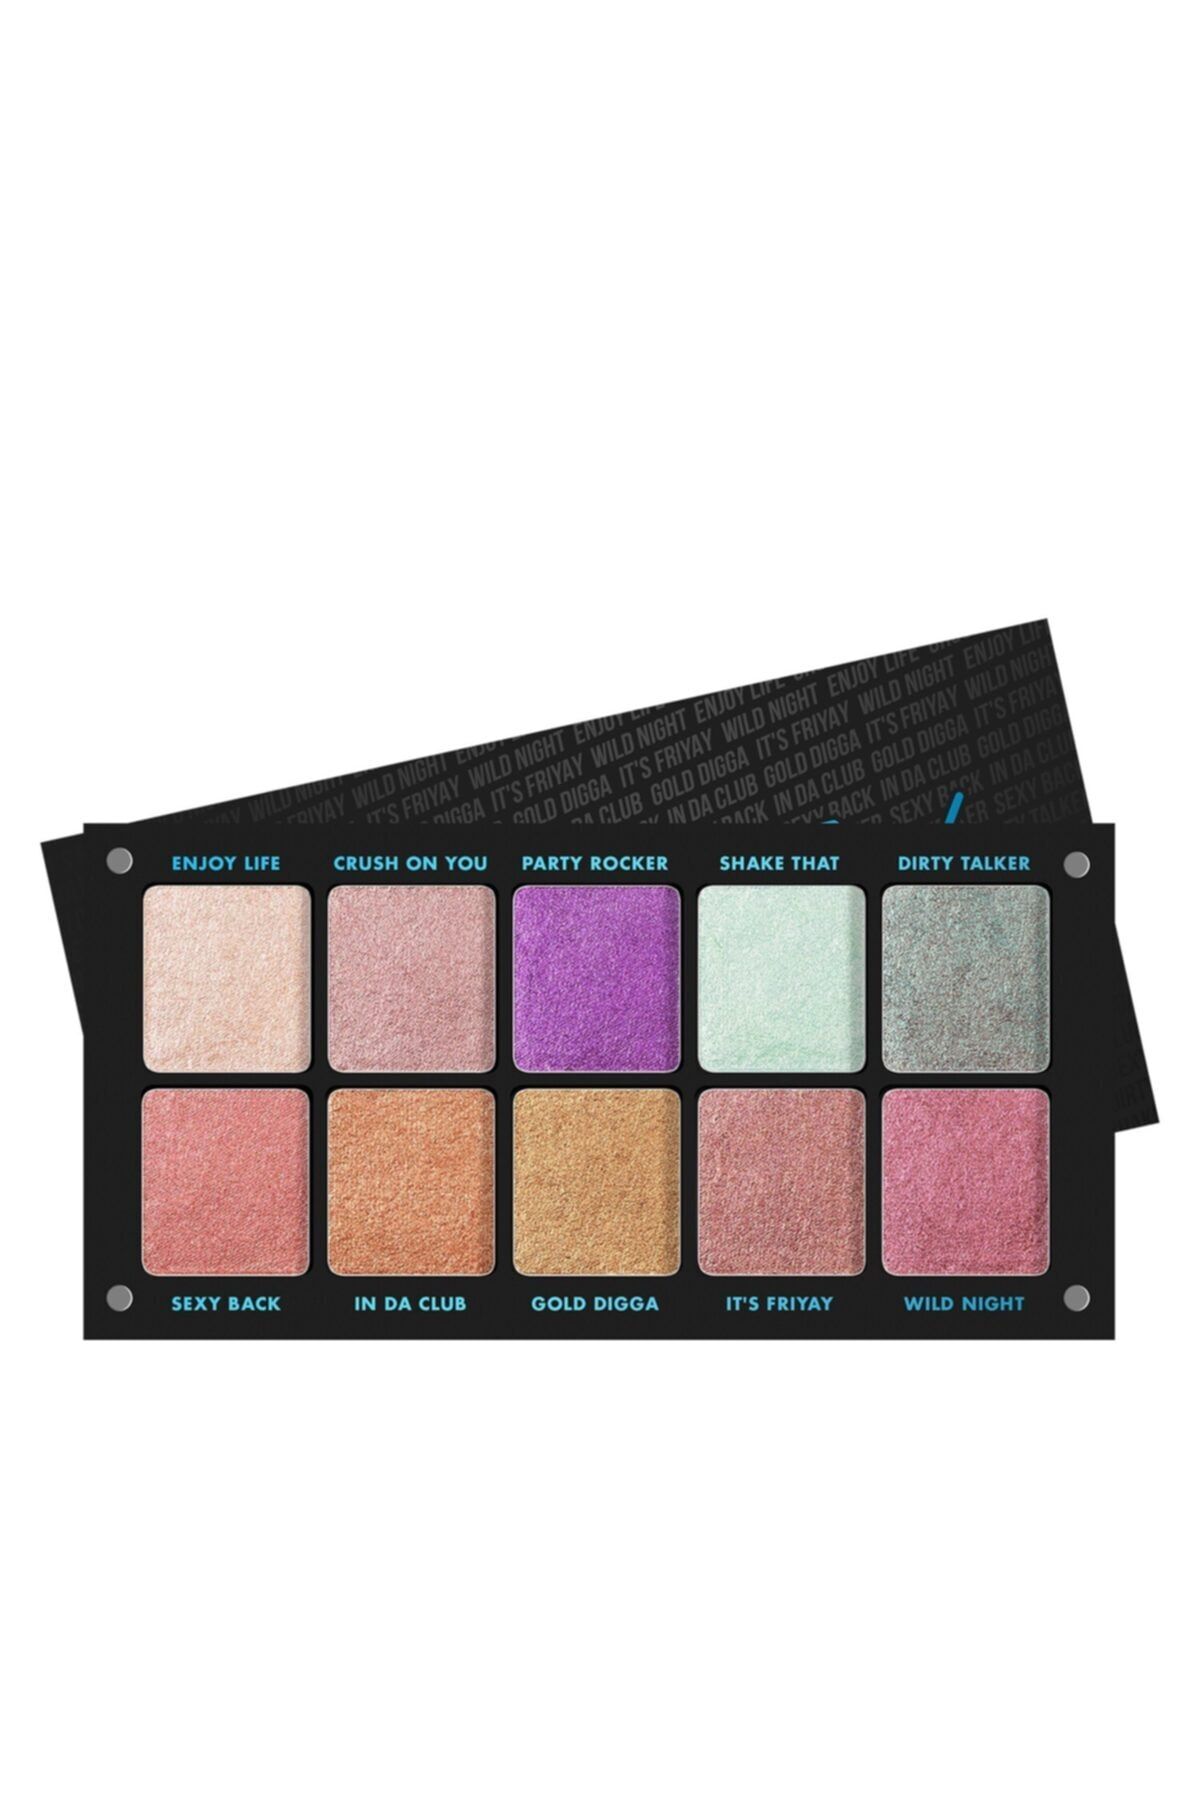 Inglot Freedom System Palette Partylicious 2.0 (full Set)